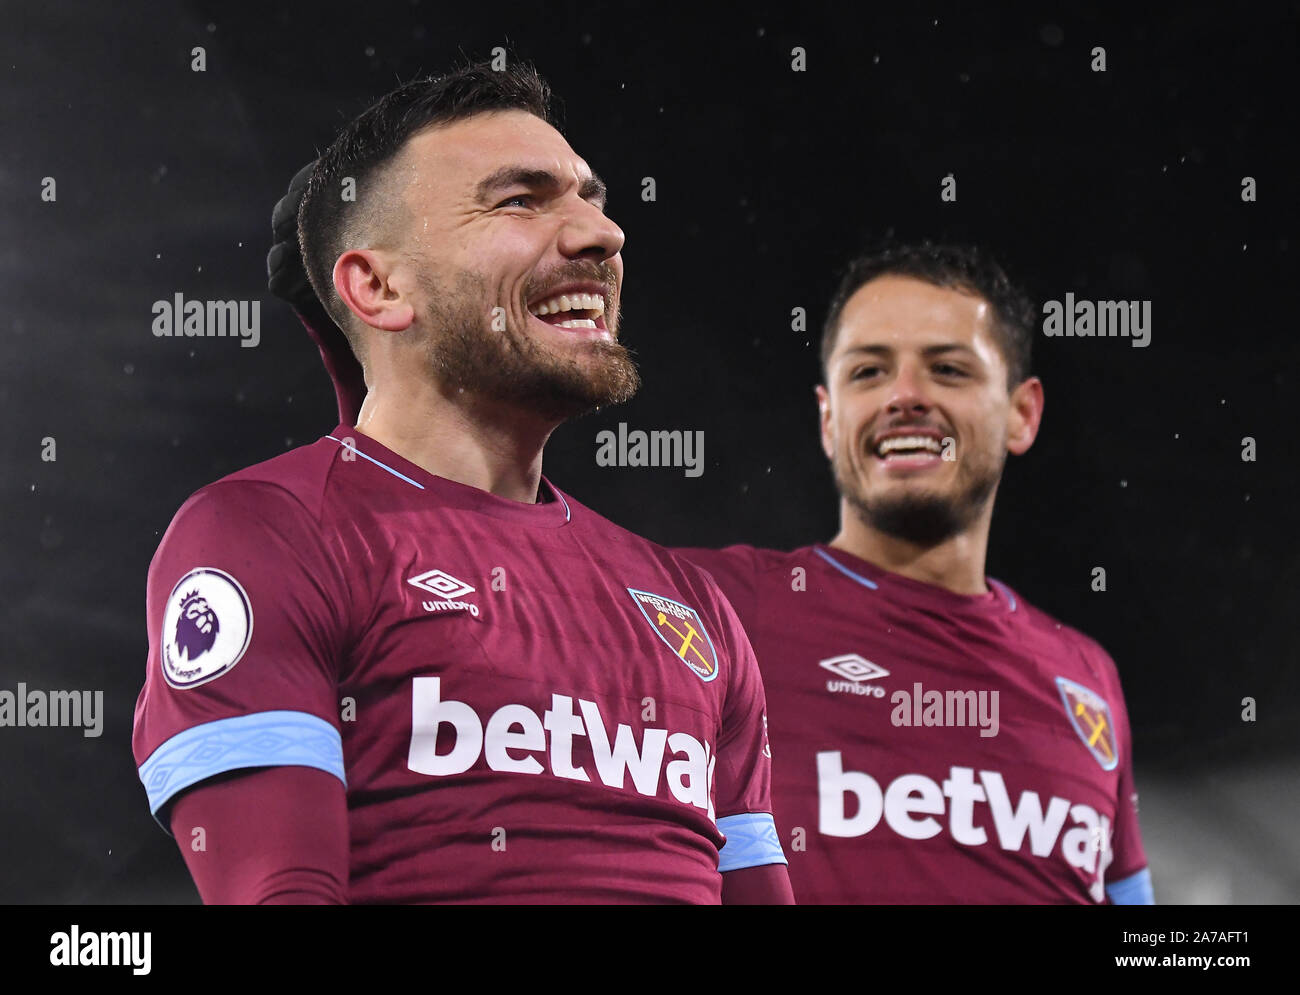 LONDON, ENGLAND - DECEMBER 15, 2018: Robert Snodgrass of West Ham celebrates with Javier Hernandez Balcazar (Chicharito) of West Ham after he scored a goal during the 2018/19 Premier League game between Fulham FC and West Ham United at Craven Cottage. Stock Photo